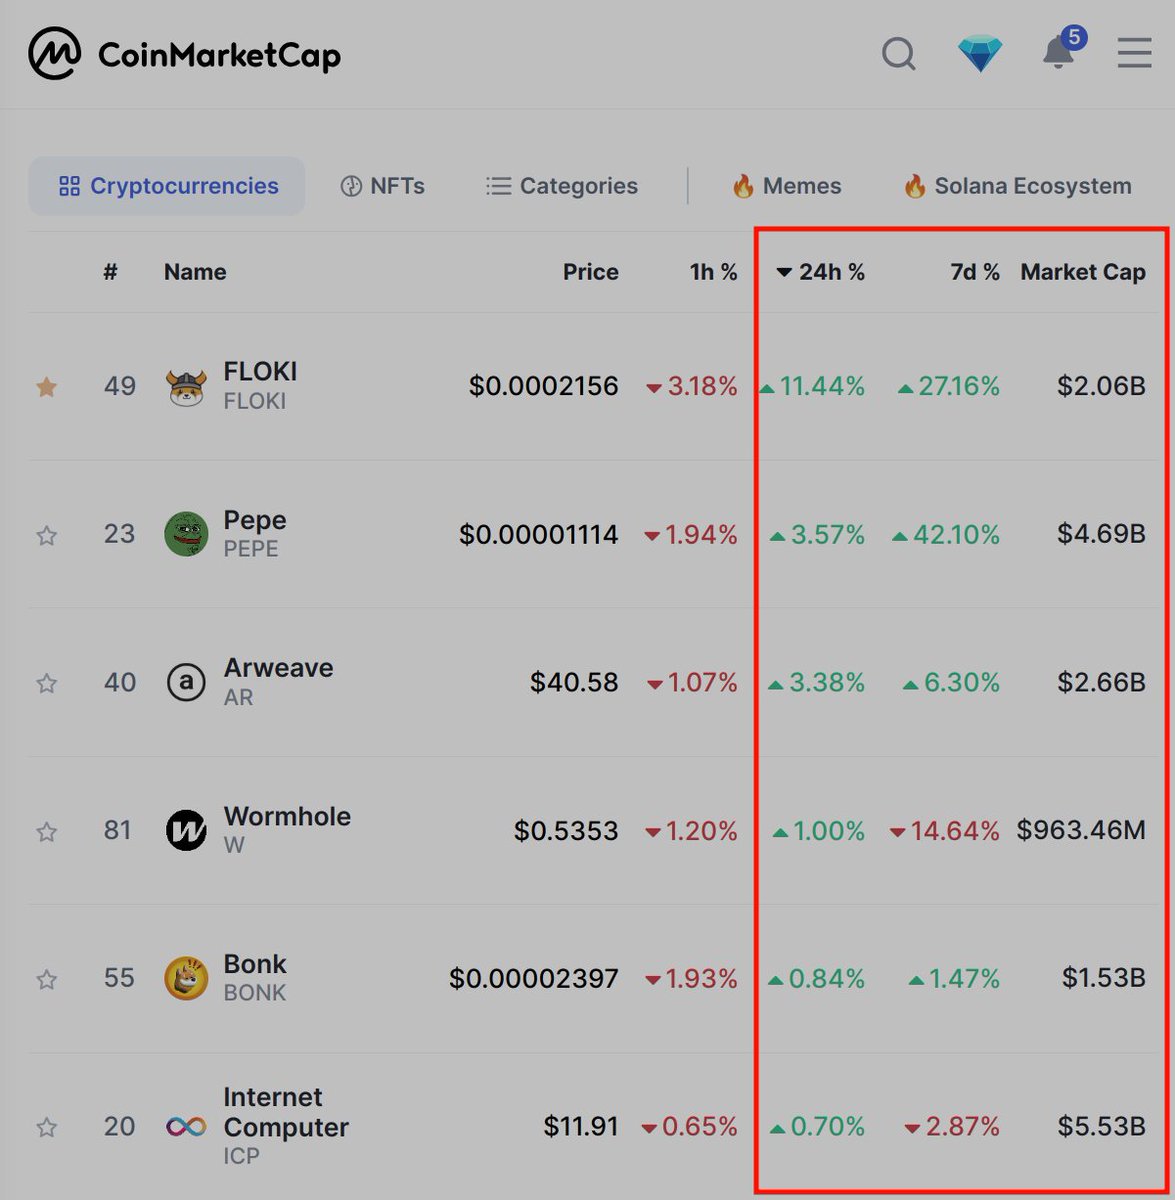 $FLOKI is currently leading as the top gainer among the top 100 coins listed on @CoinMarketCap! 🔥

Notably, Floki's market cap climbed over the $2 billion mark after an 11% price increase in the last 24 hours.

The meme coin craze is definitely back and ready for more.